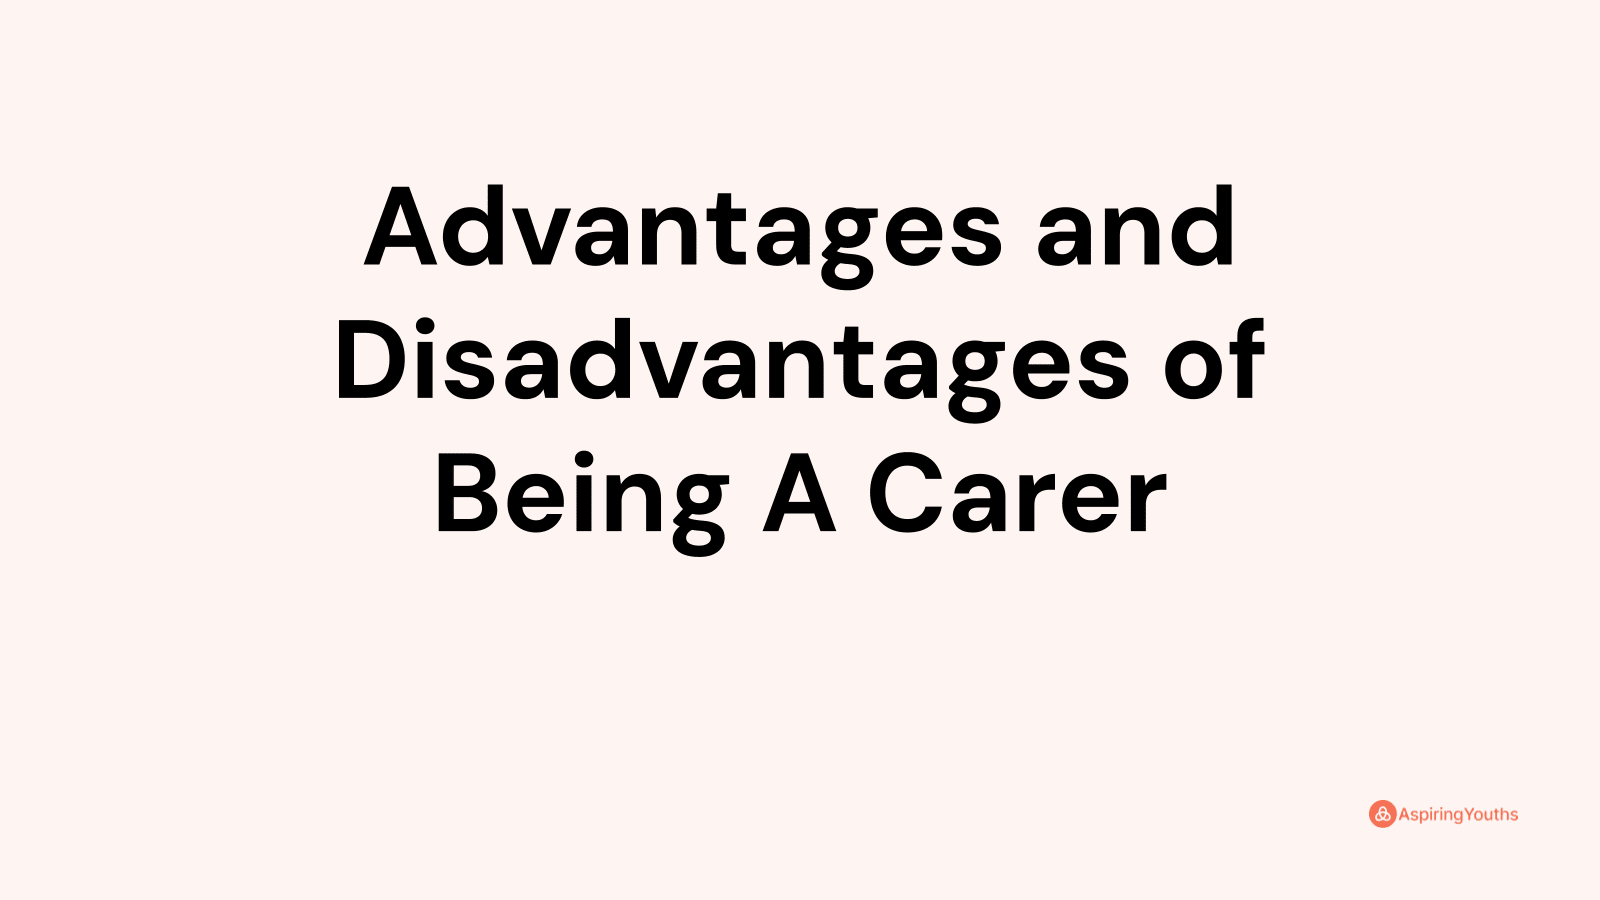 Advantages and disadvantages of Being A Carer